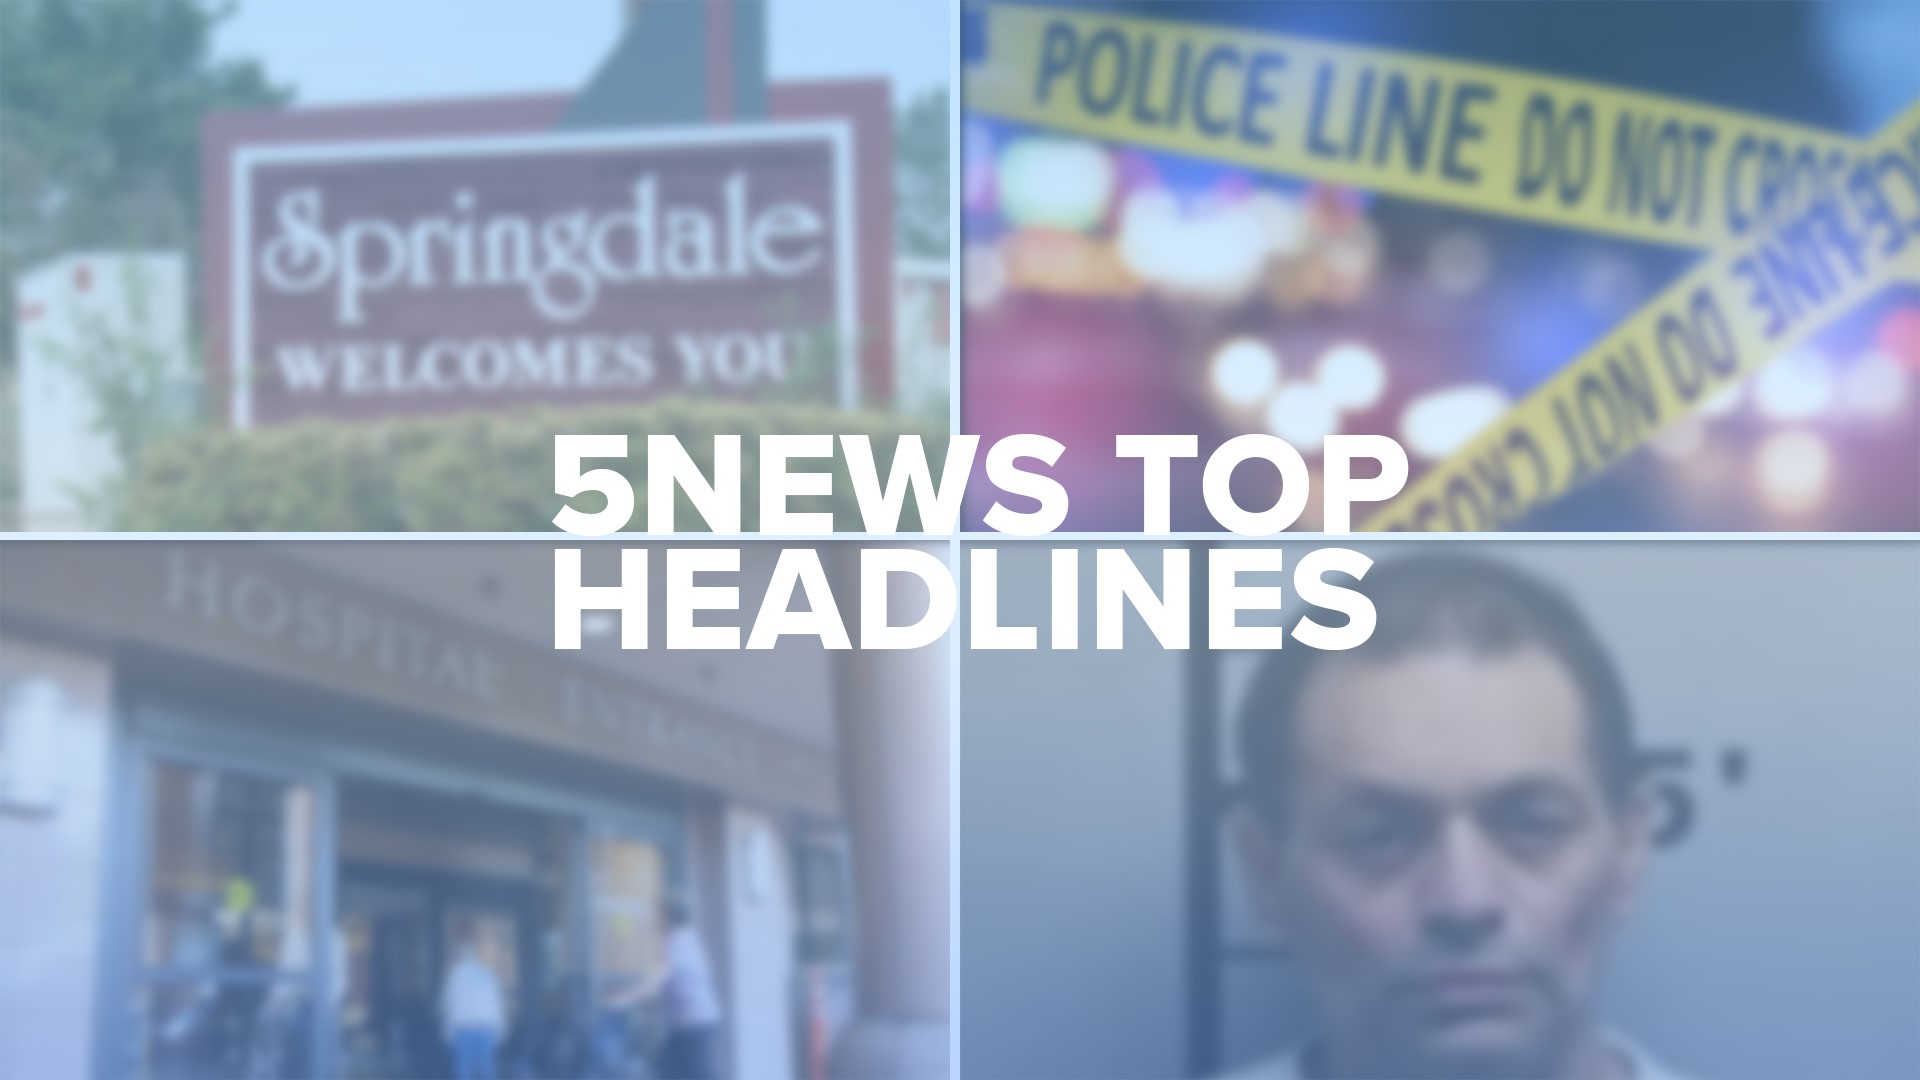 Overnight shooting incident in Springdale, latest on Mauricio Torres' murder trial and Gov. Sanders' federal waiver request for new Medicaid work requirement.